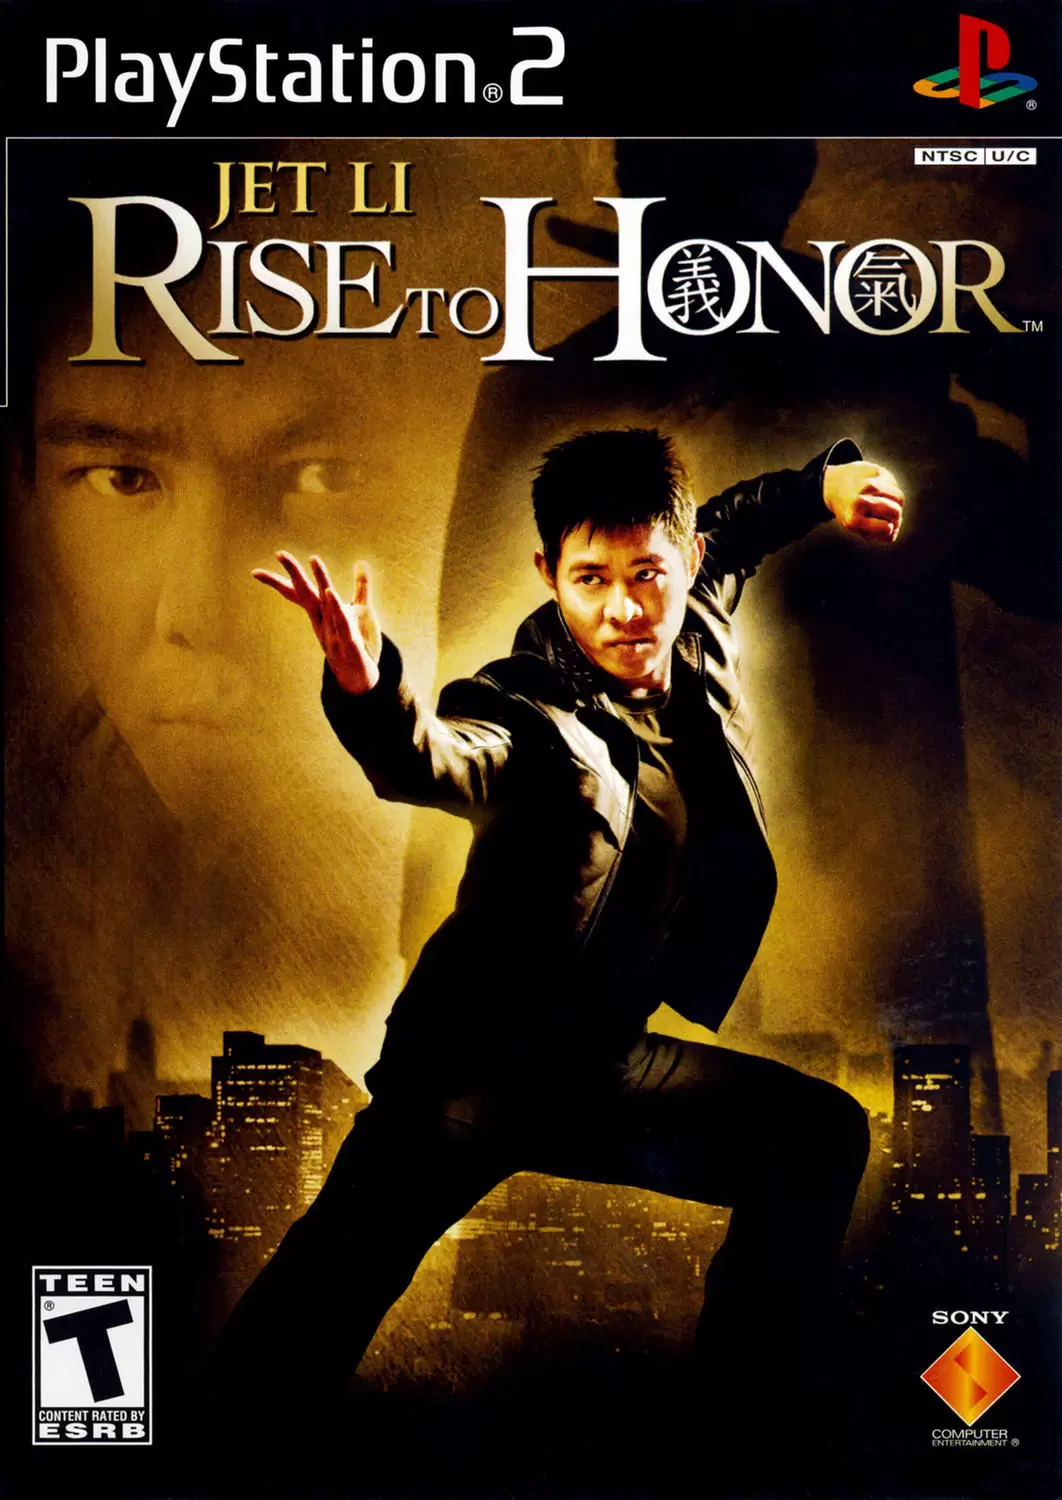 PS2 Games - Jet Li: Rise to Honor